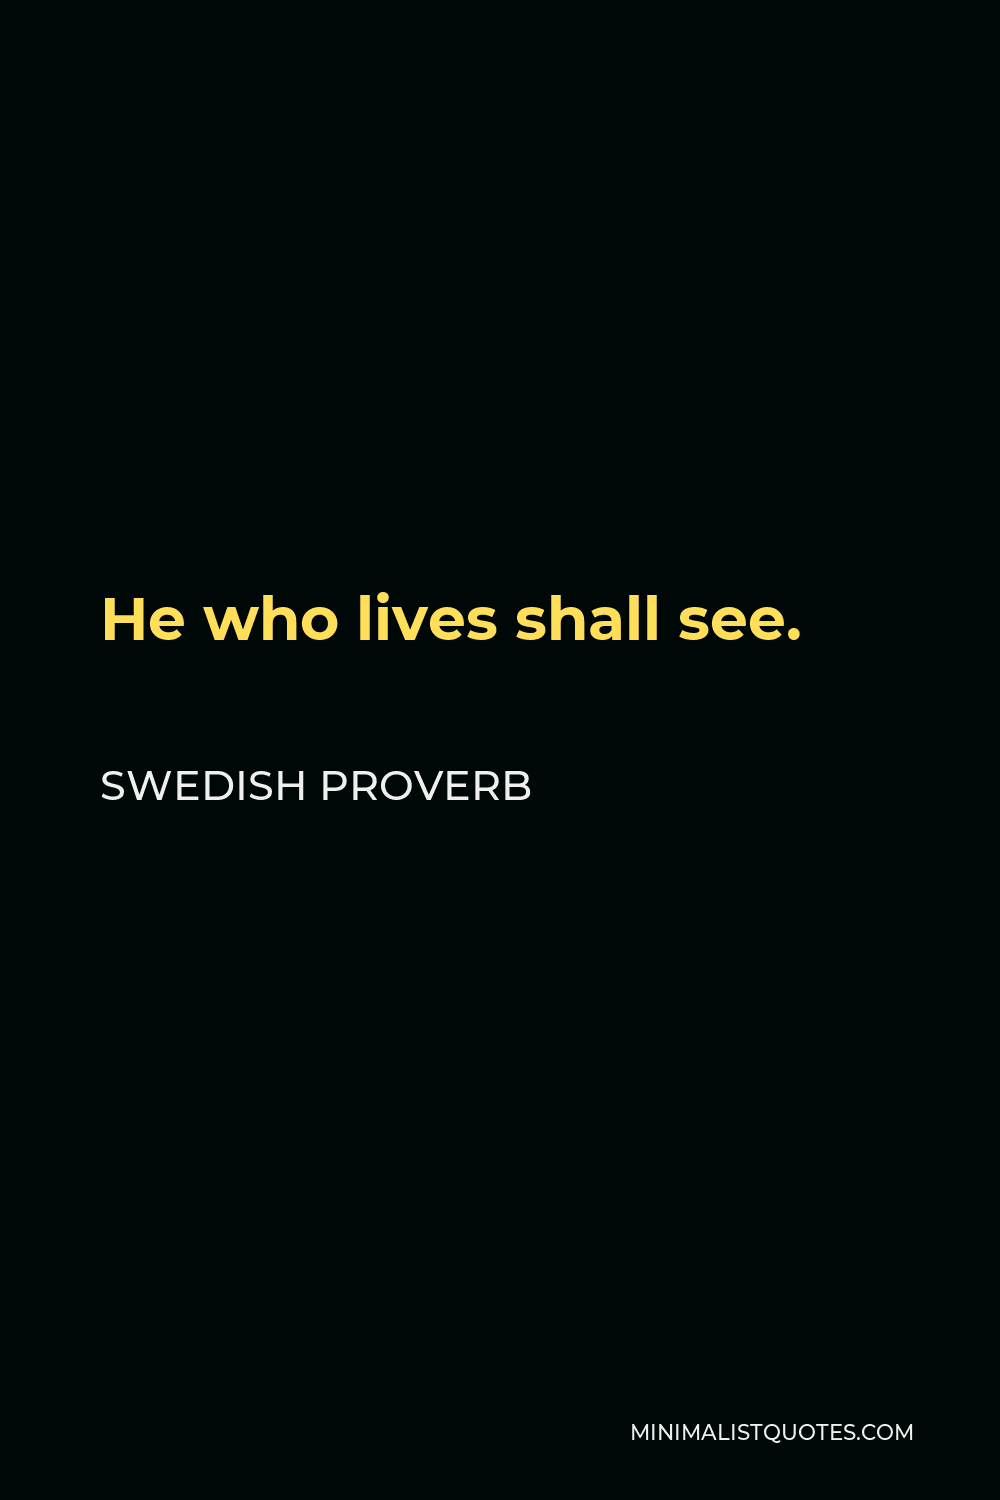 Swedish Proverb Quote - He who lives shall see.